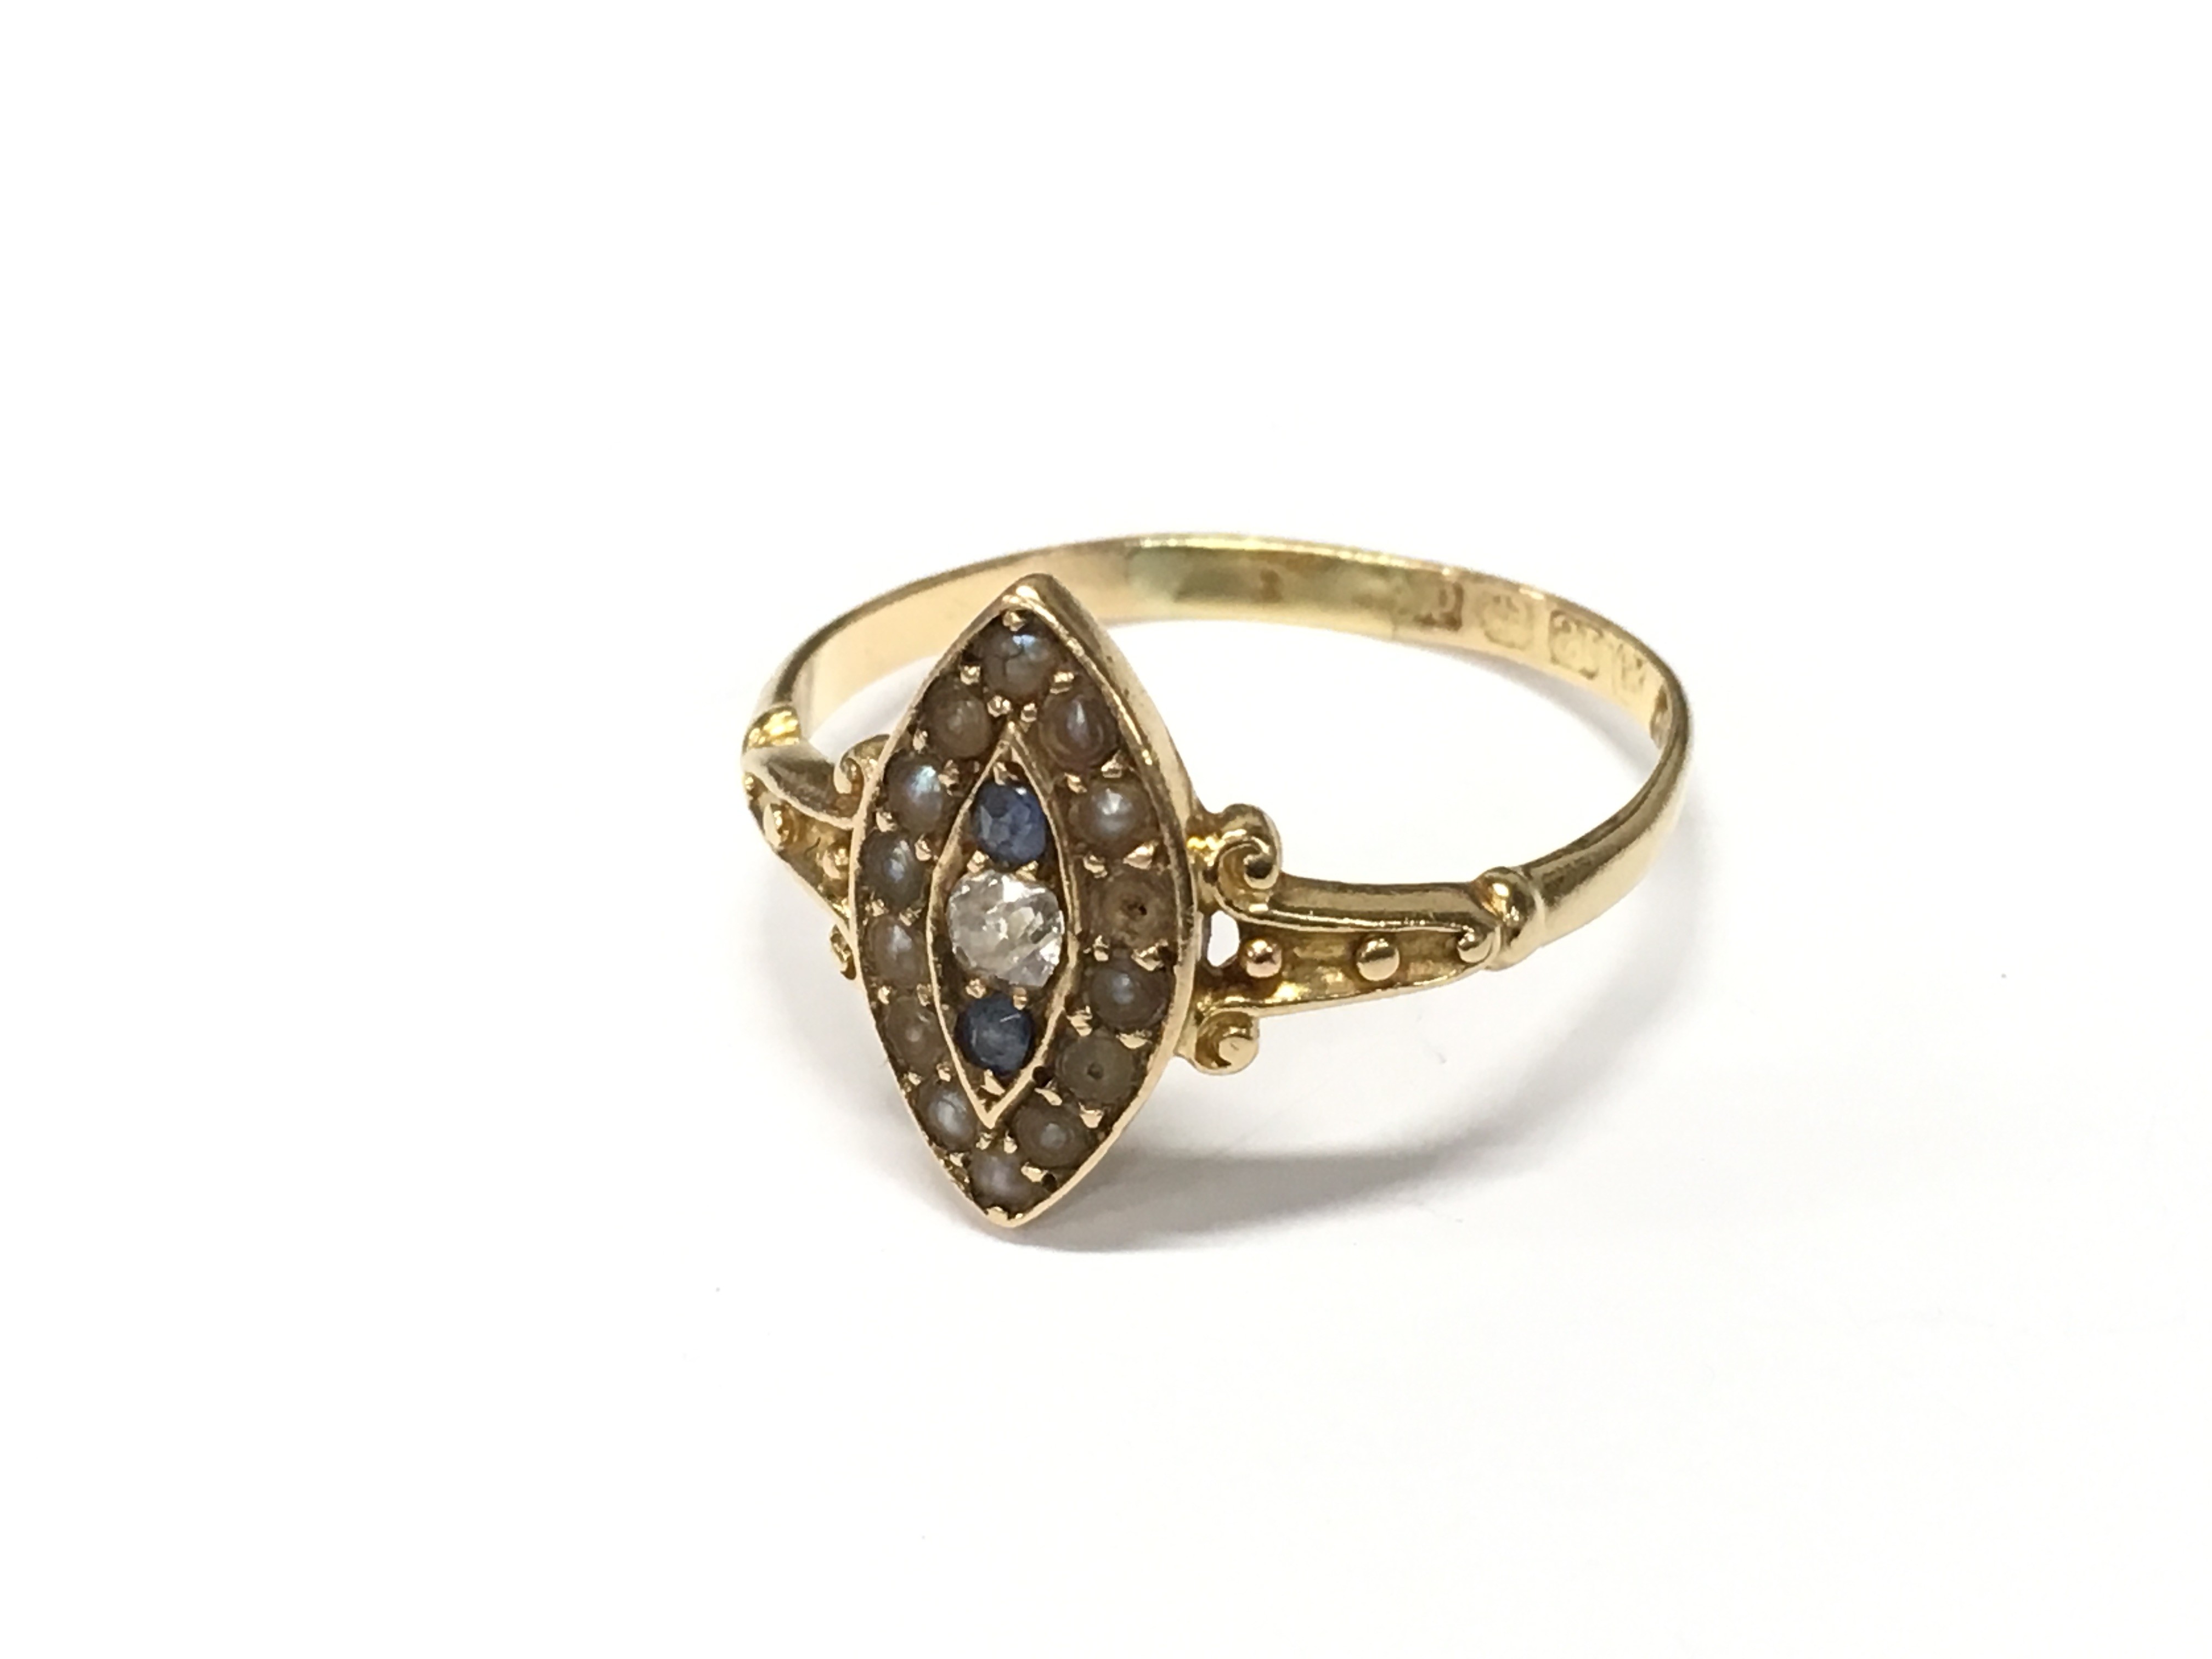 An 18ct yellow gold Diamond, Seed Pearl and Sapphire antique ring. Size S. Some damage to Pearls.